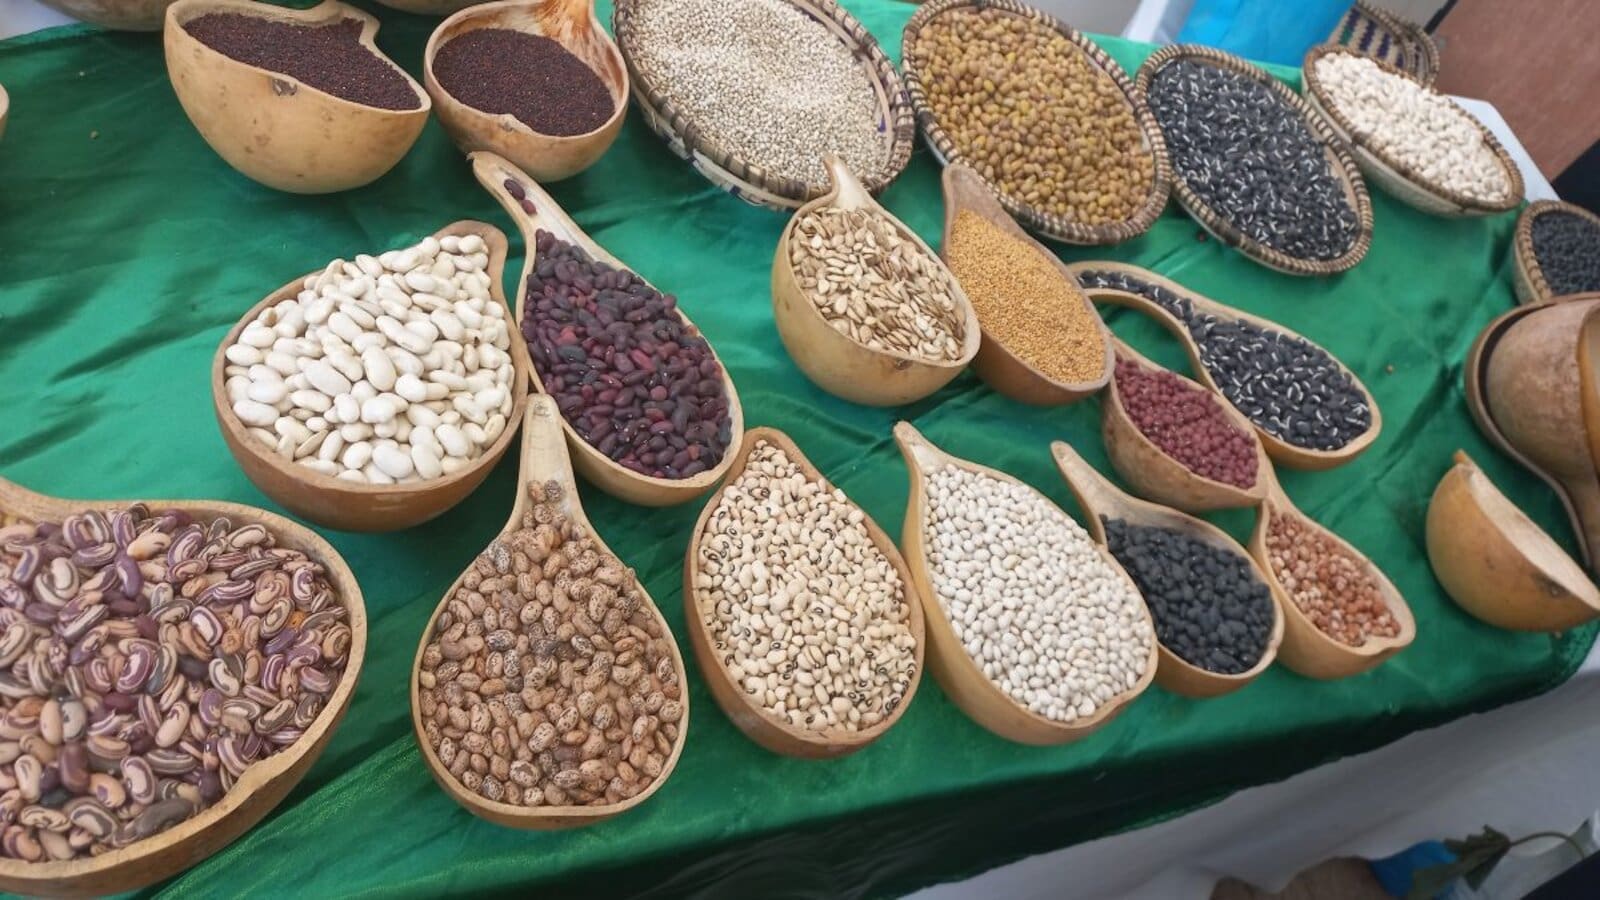 Food systems experts want state to ease restrictions on circulation of indigenous seeds in Kenya